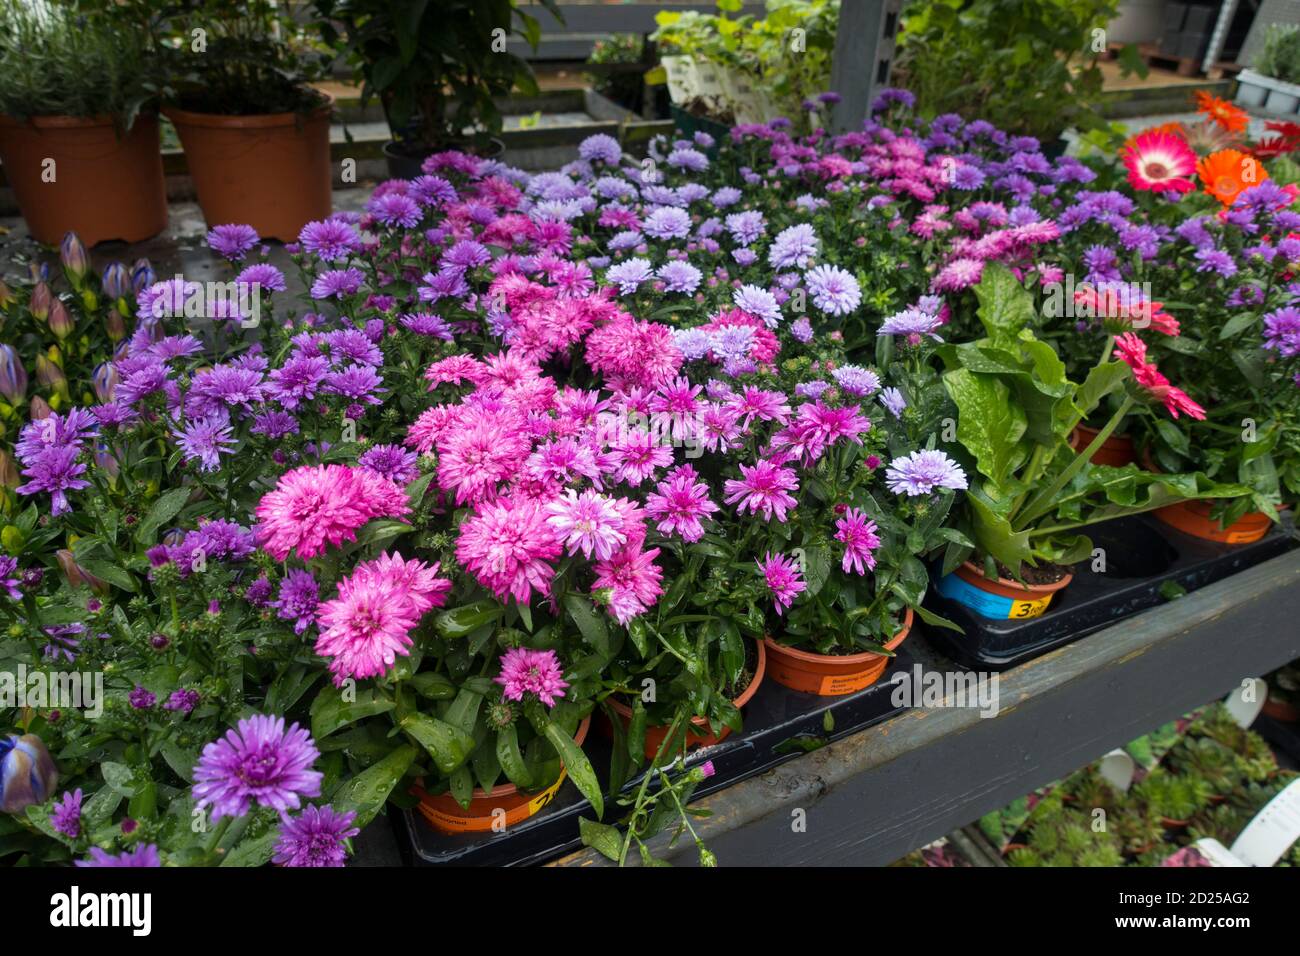 A selection of Aster plants in Garden Centre. UK. Stock Photo